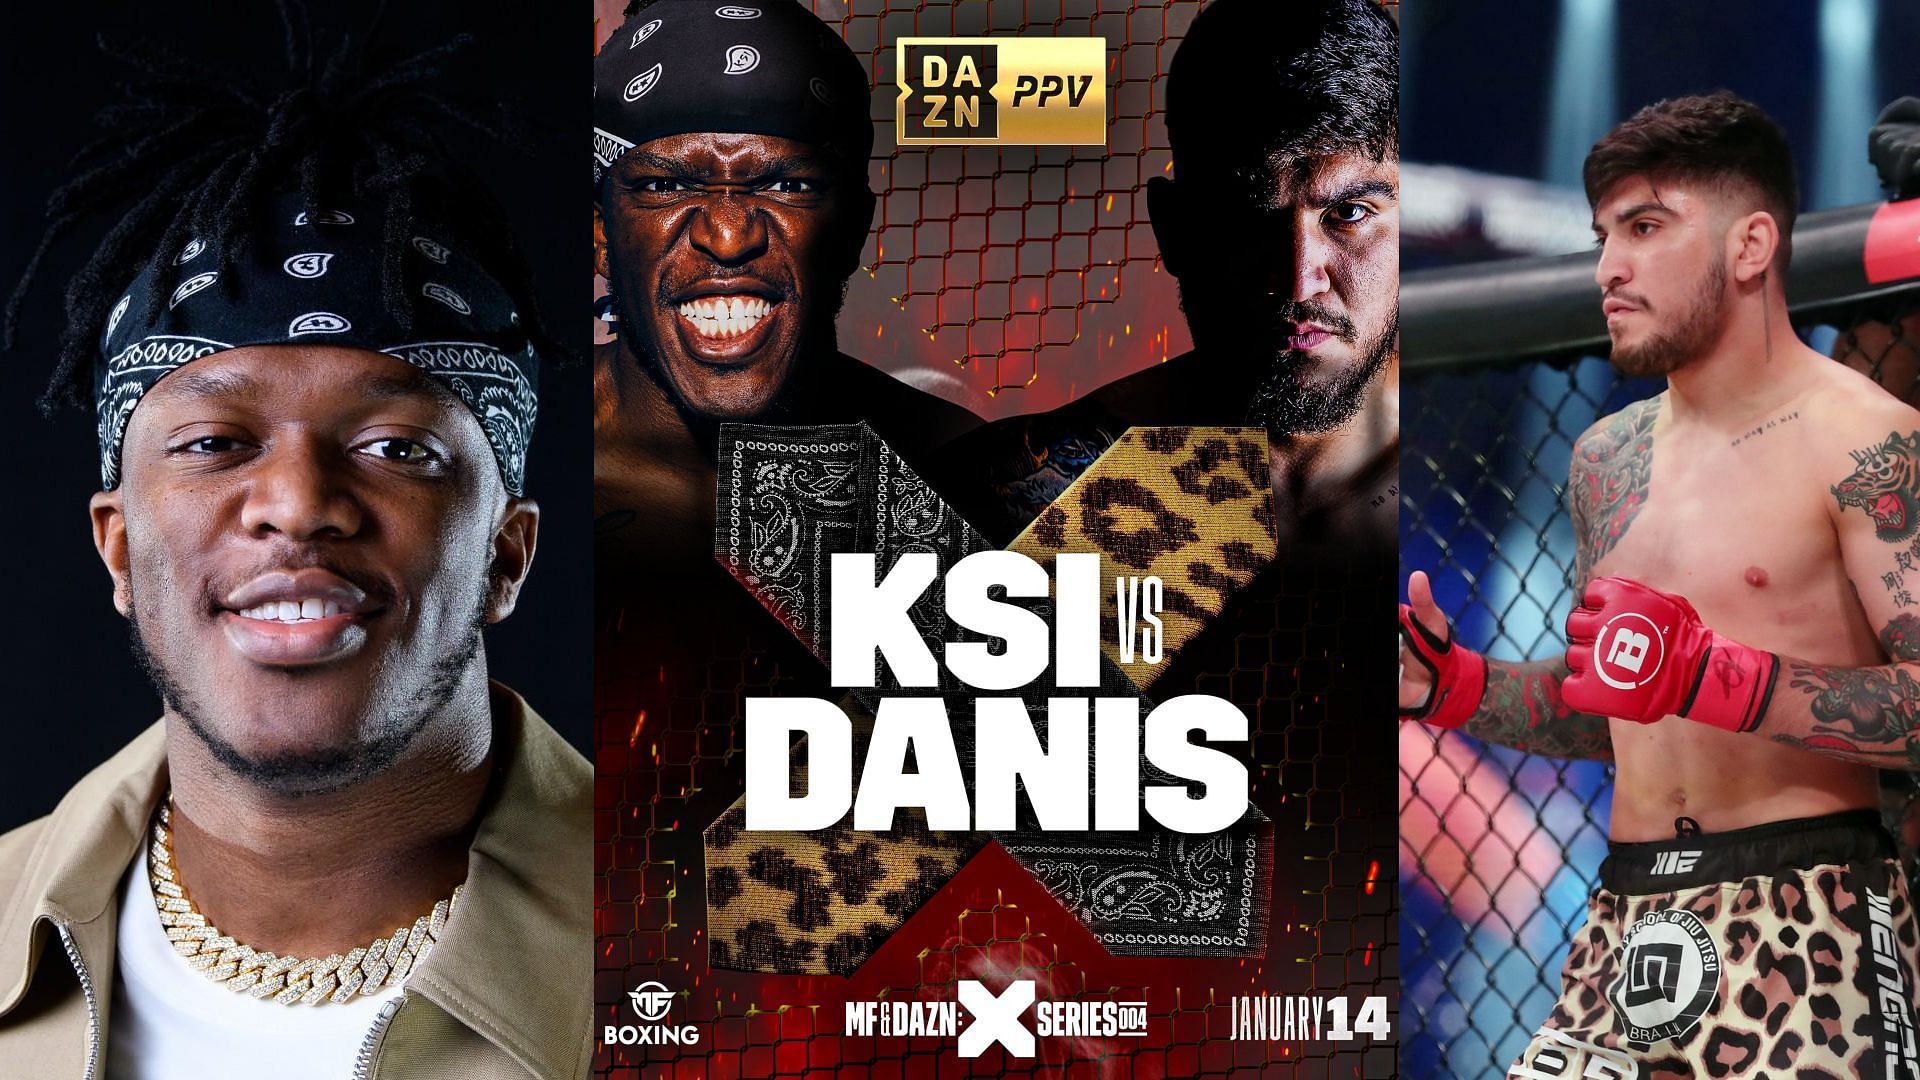 KSI announces his next opponent for January Misfits Boxing card